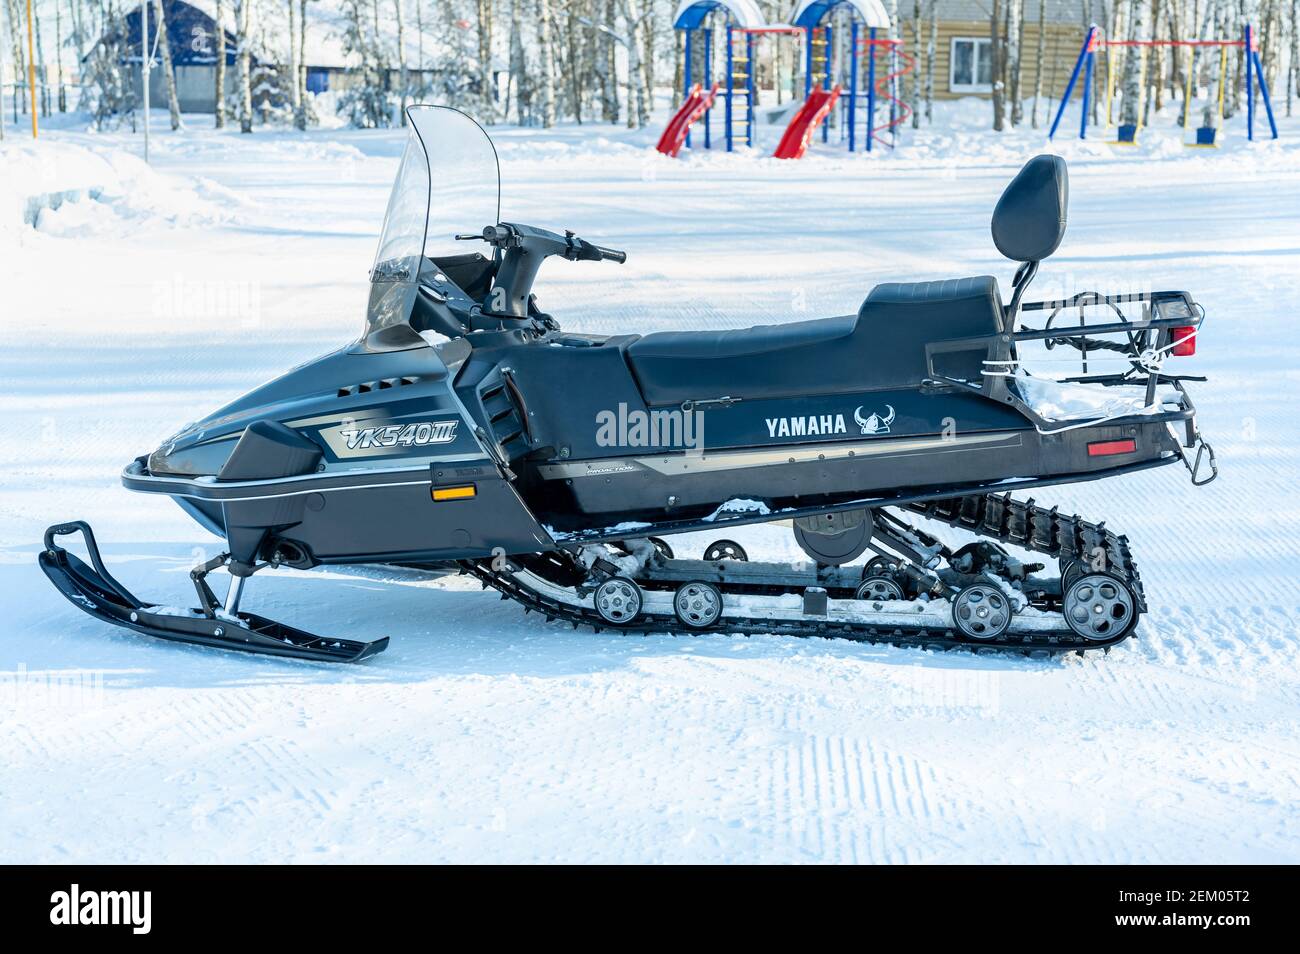 Moscow, Russia February 23, 2021: Snowmobile Yamaha, model Viking 540 model standing in the snow Stock Photo